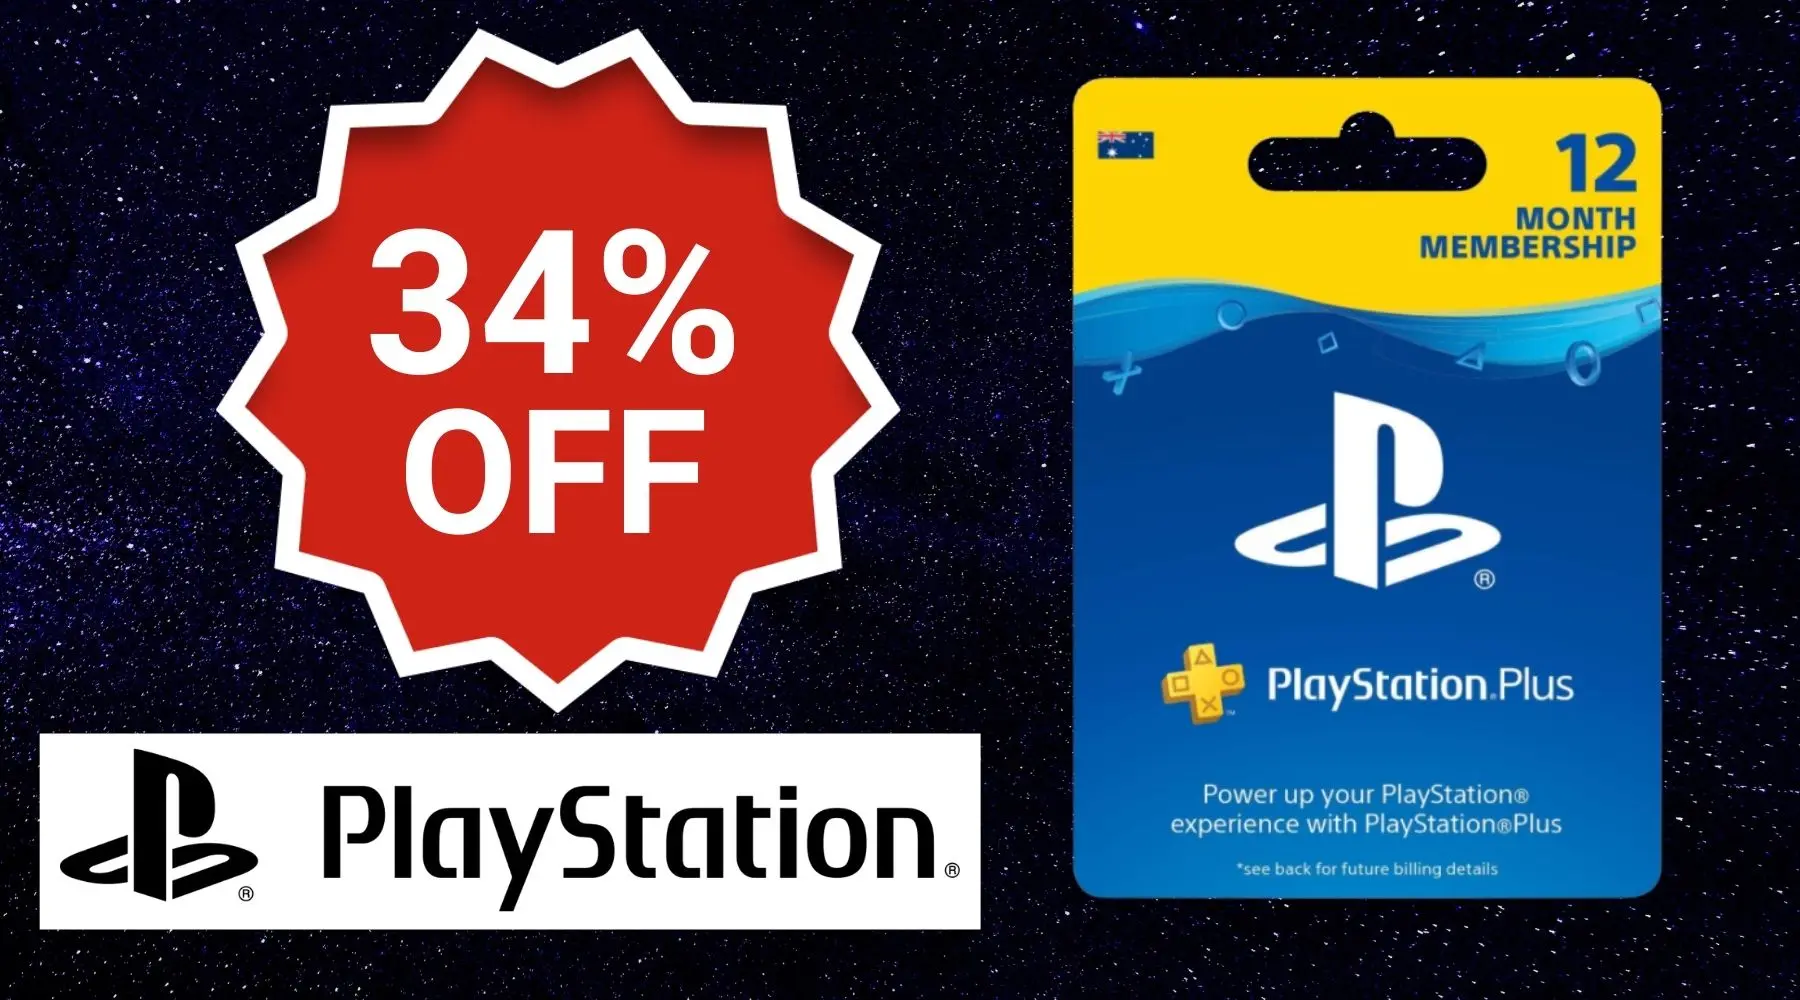 Black Friday Deal: Save 34% on 12-Month PS Plus Membership at